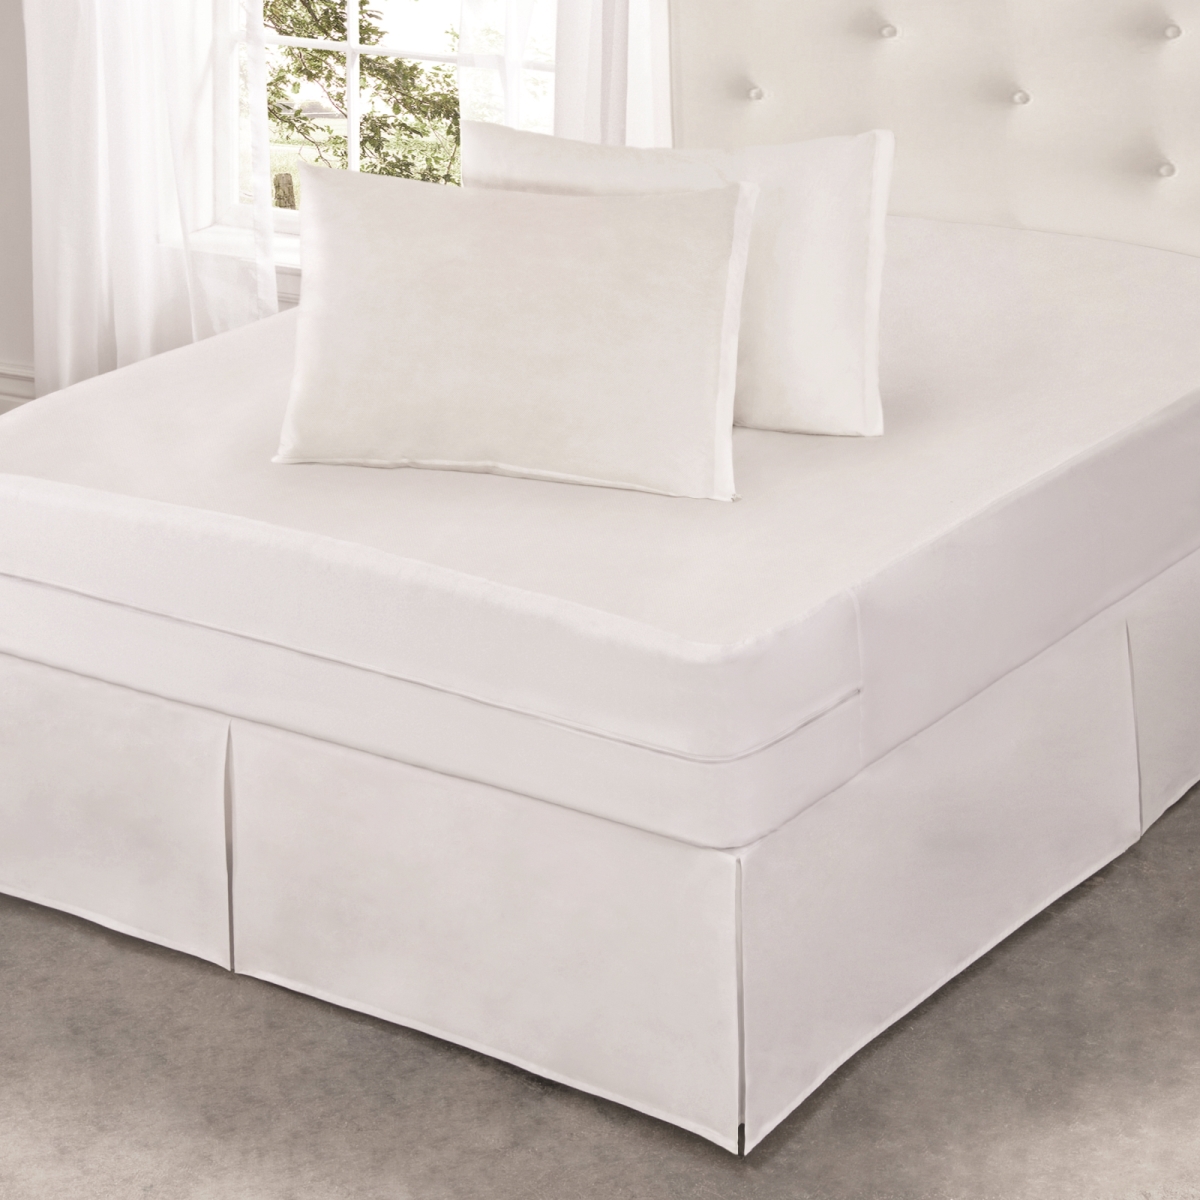 All172xxwhit01 Cool Bamboo Mattress Protector With Bed Bug Blocker, White - Twin Size